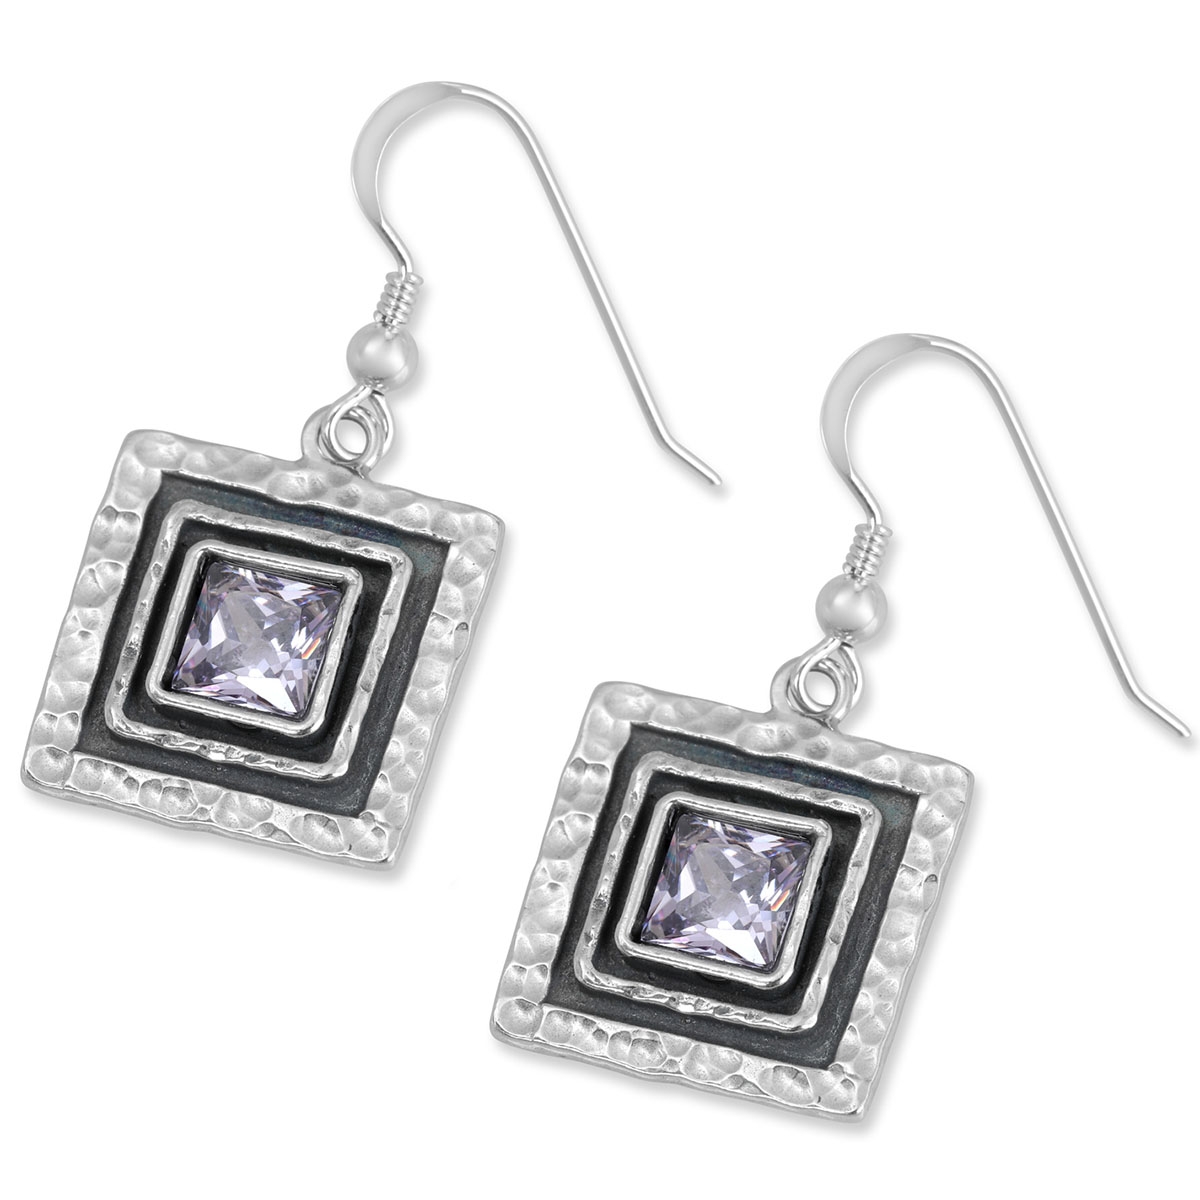 Rafael Jewelry Hammered Square Sterling Silver Earrings – Lavender  - 1